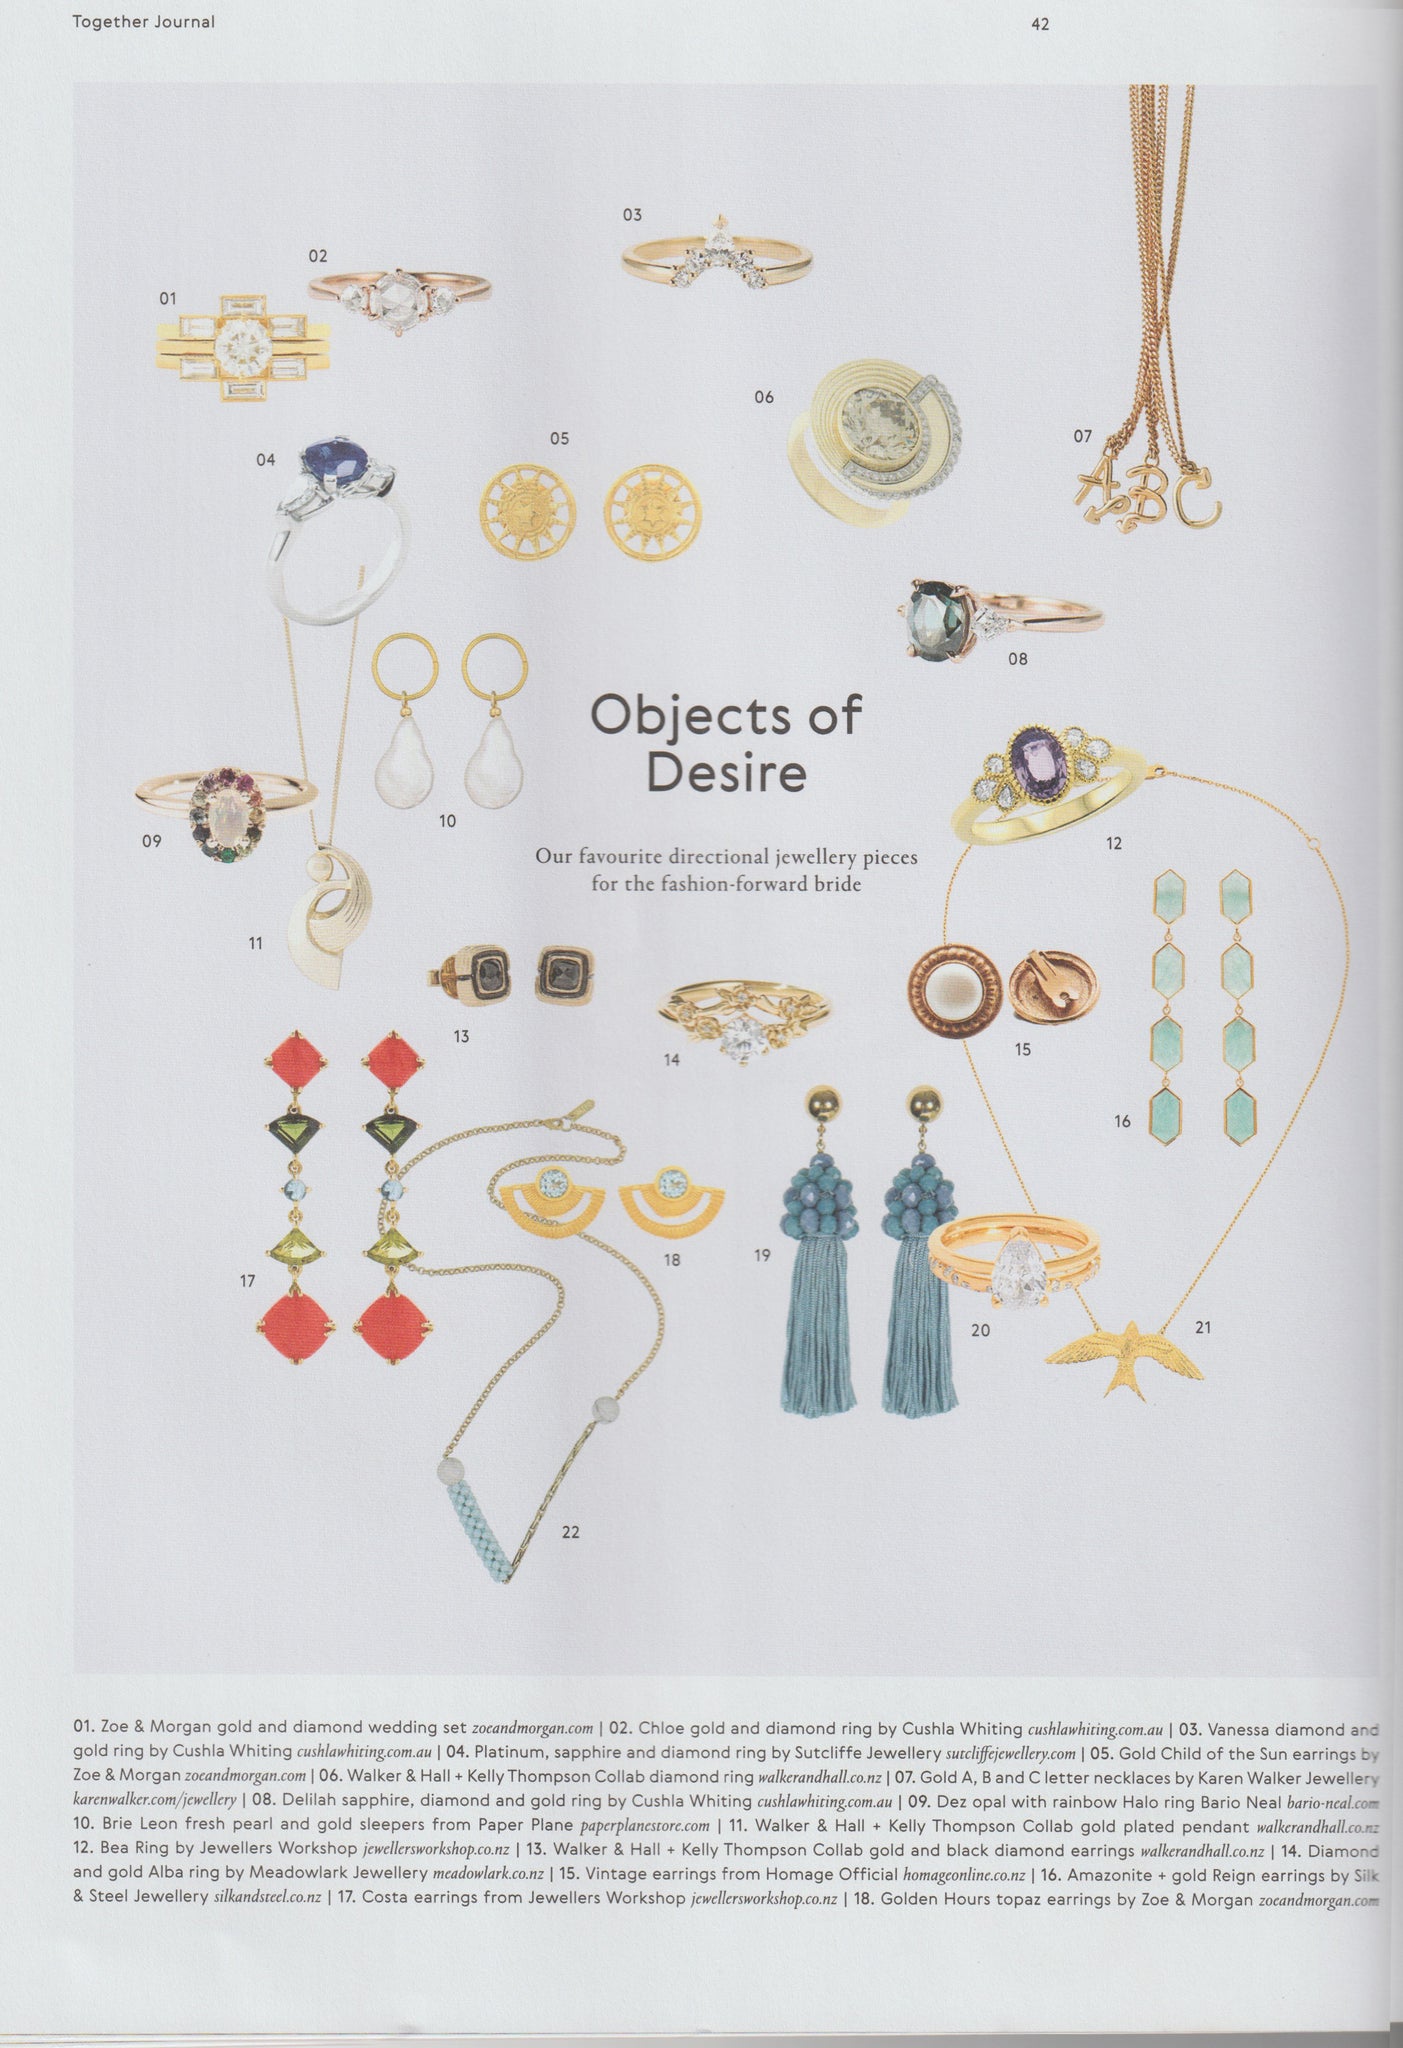 Together Journal Issue 14 Illustrator Kelly Thompson jewellery design collaboration with Walker and Hall jewellery